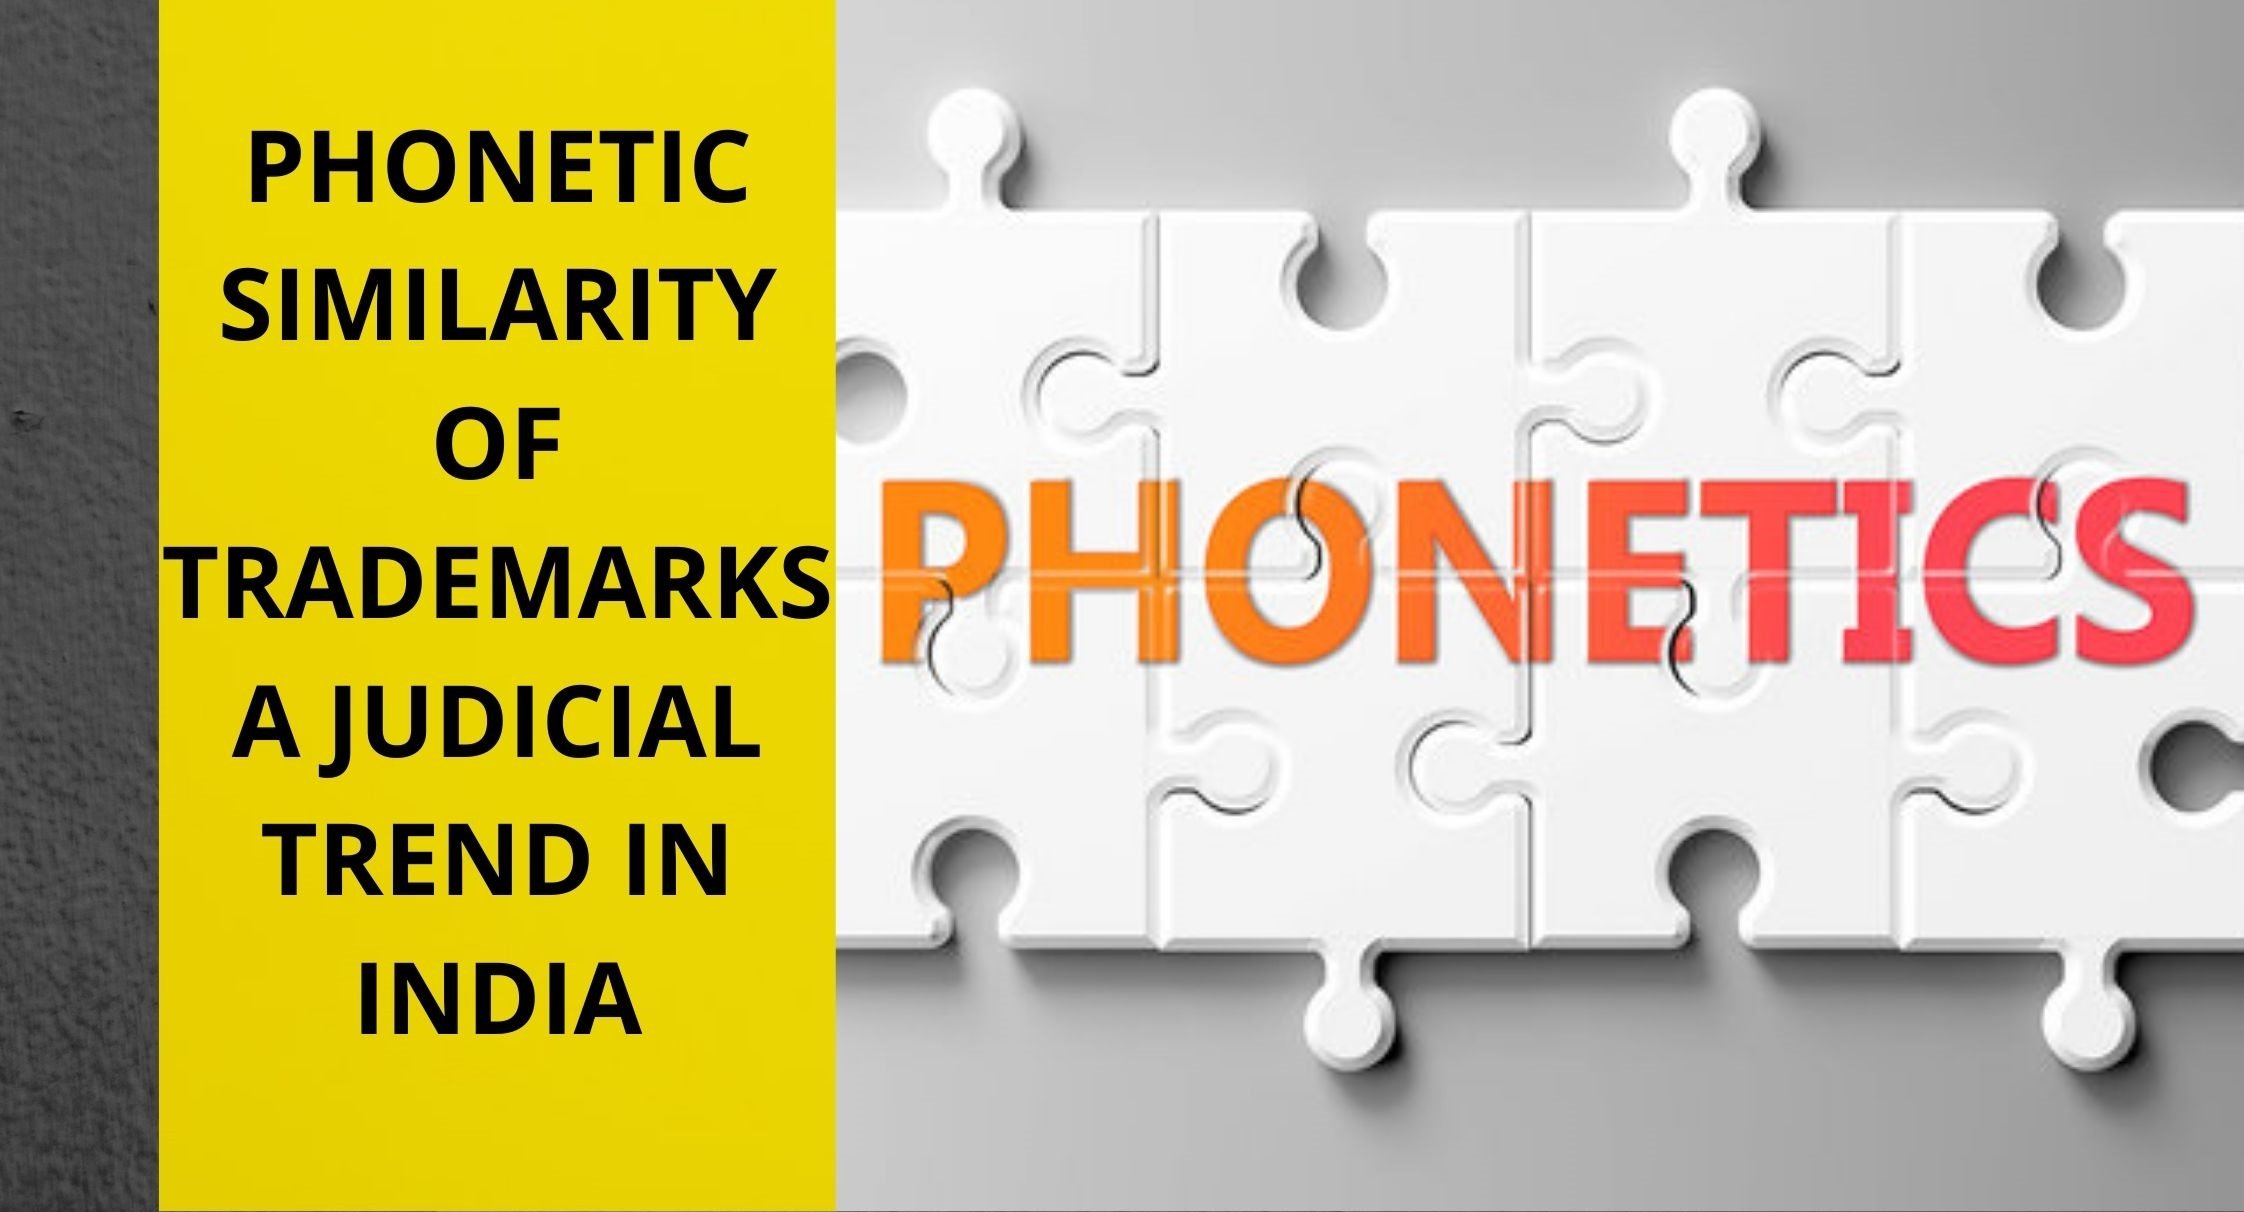 PHONETIC SIMILARITY OF TRADEMARKS- A JUDICIAL TREND IN INDIA